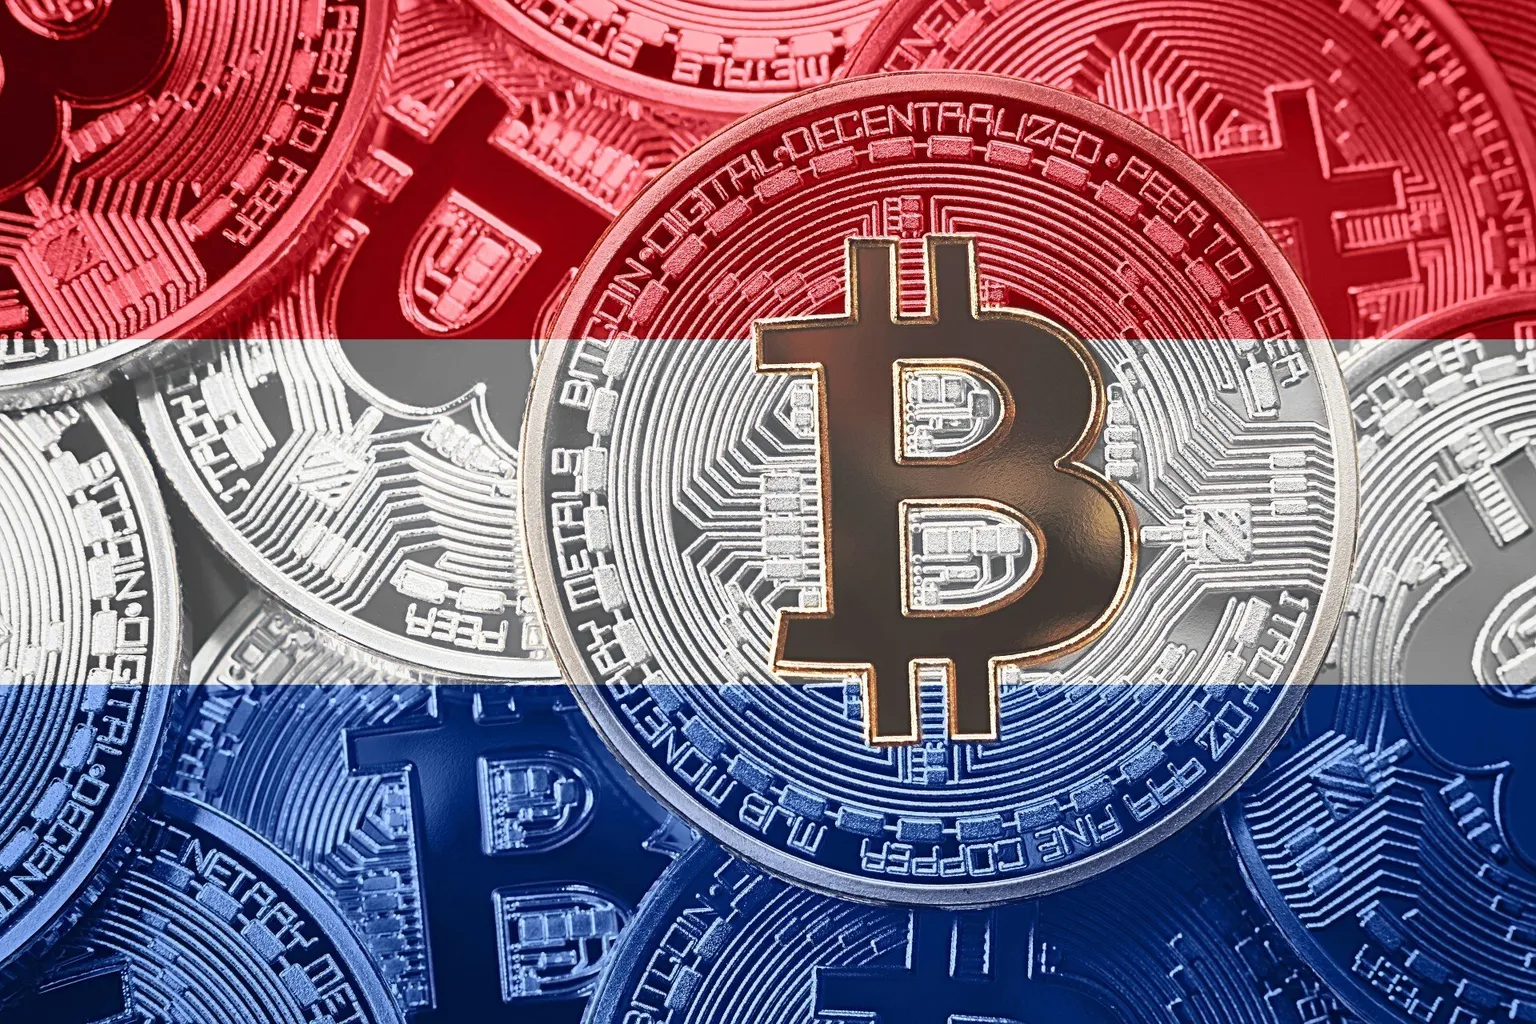 Bitcoin and the Netherlands. Image: Shutterstock.